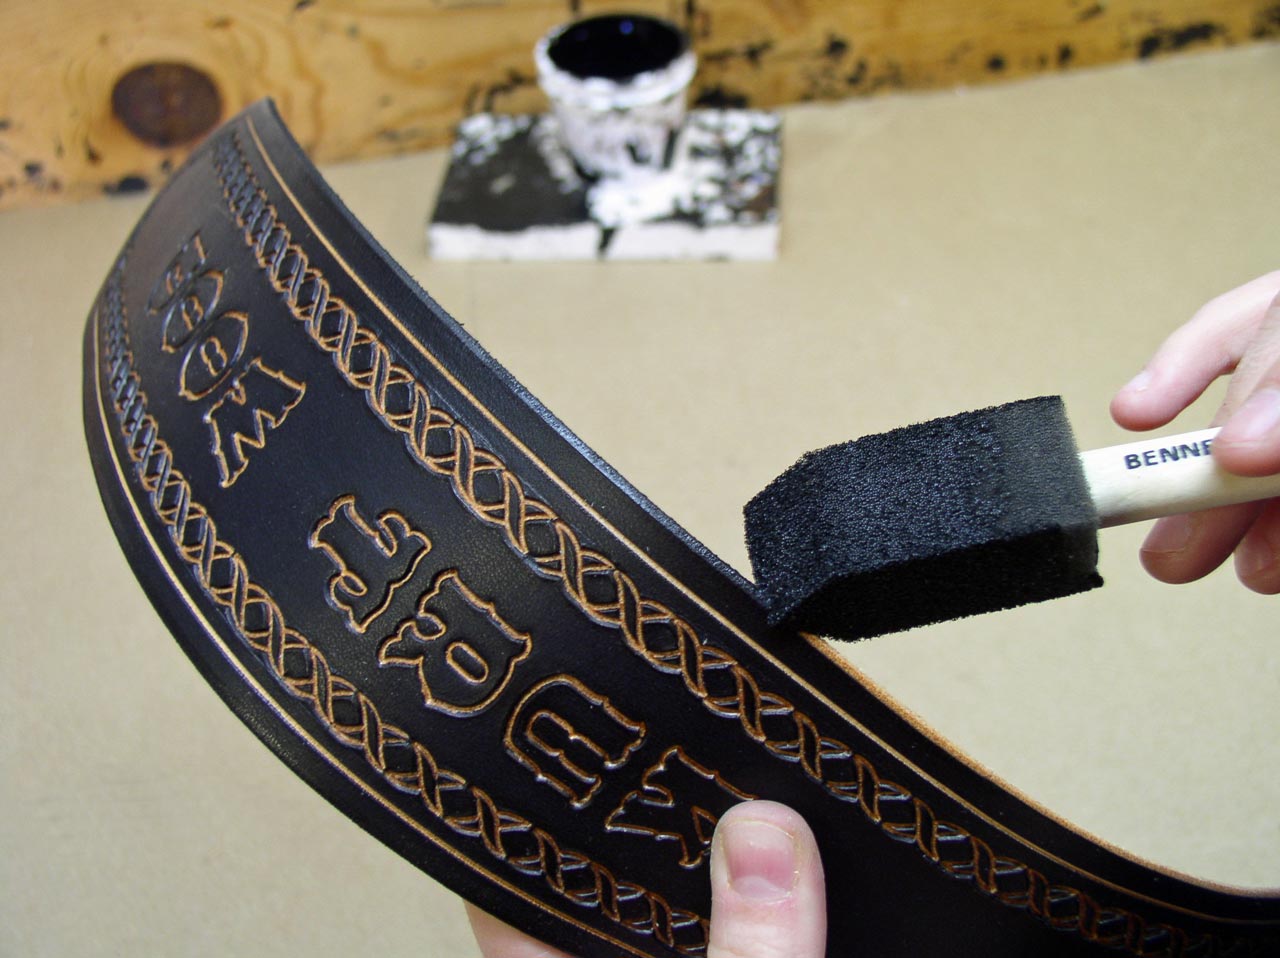 Dyeing the edge of the guitar strap